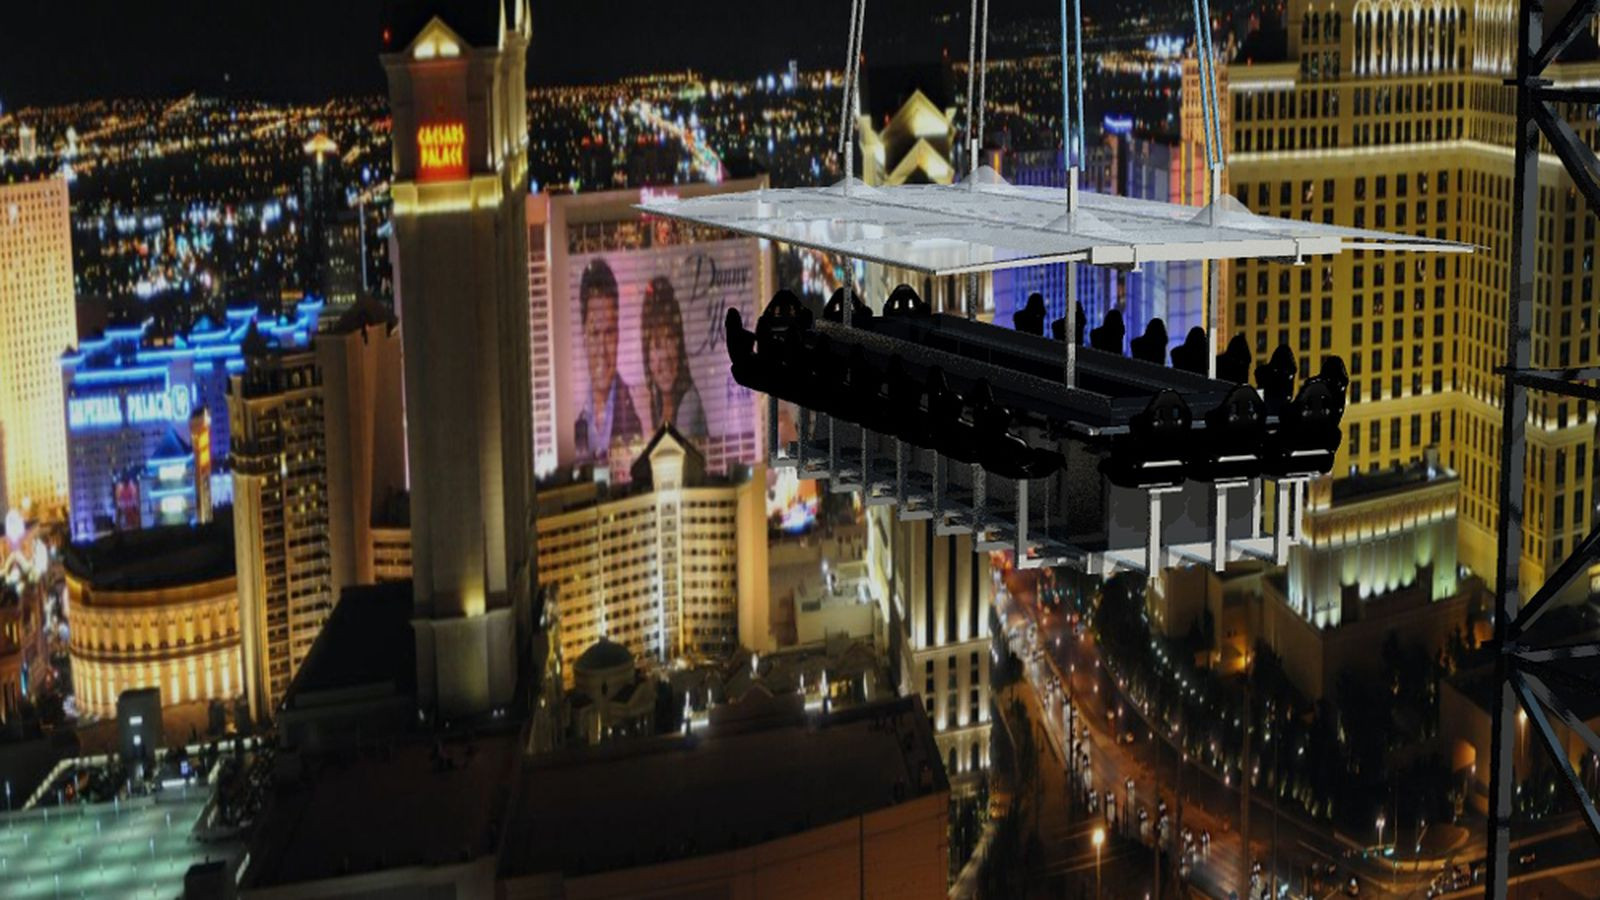 Dinner In Vegas
 Restaurant Features 180 Foot High Dinners in the Sky